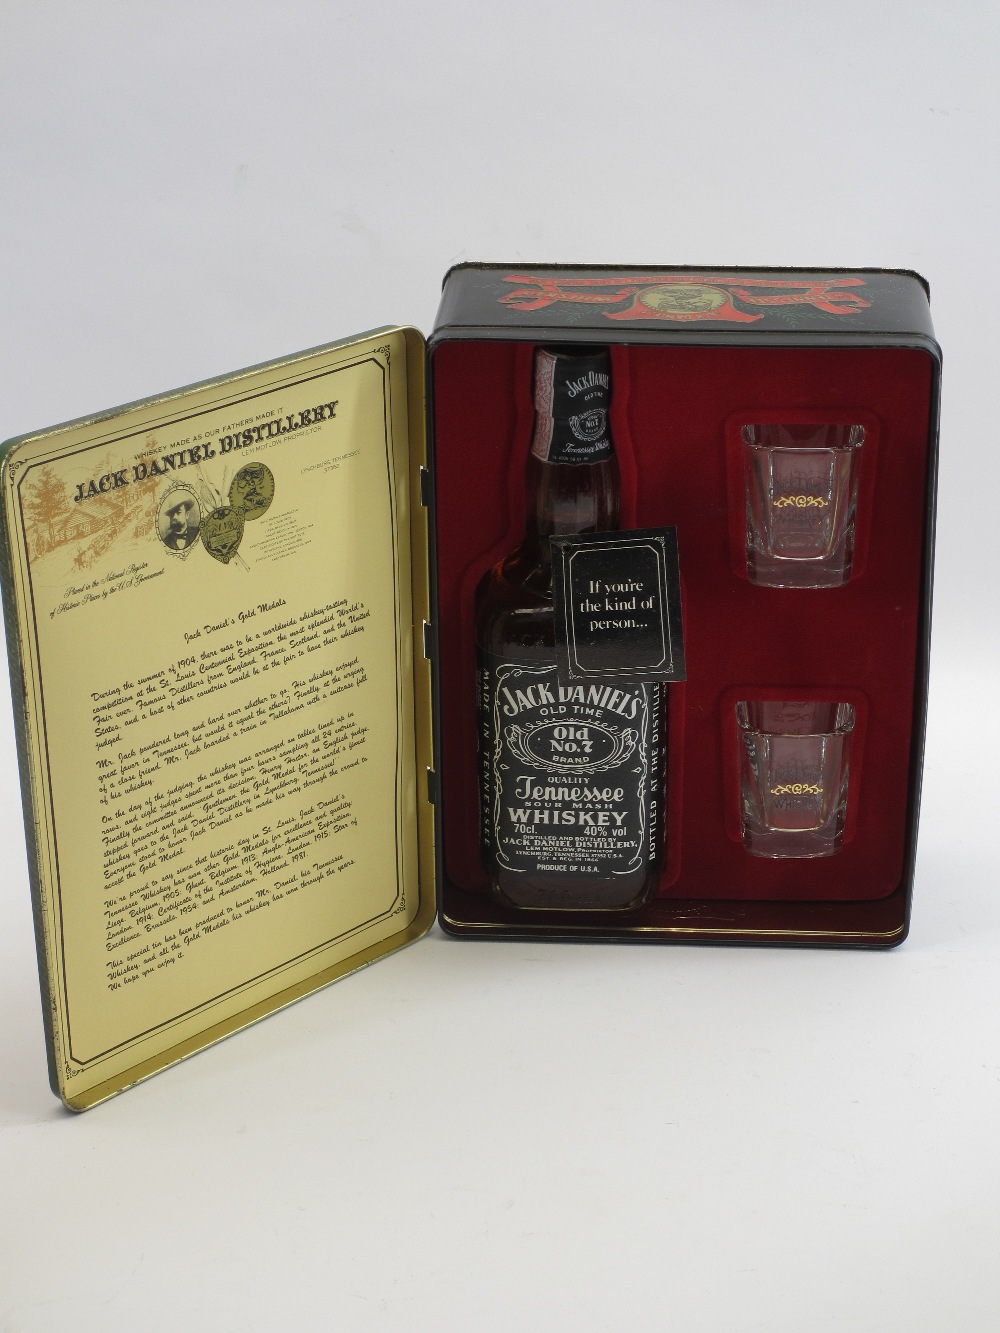 ALCOHOL - Jack Daniels gift sets (2) and another sealed bottle - Image 3 of 3